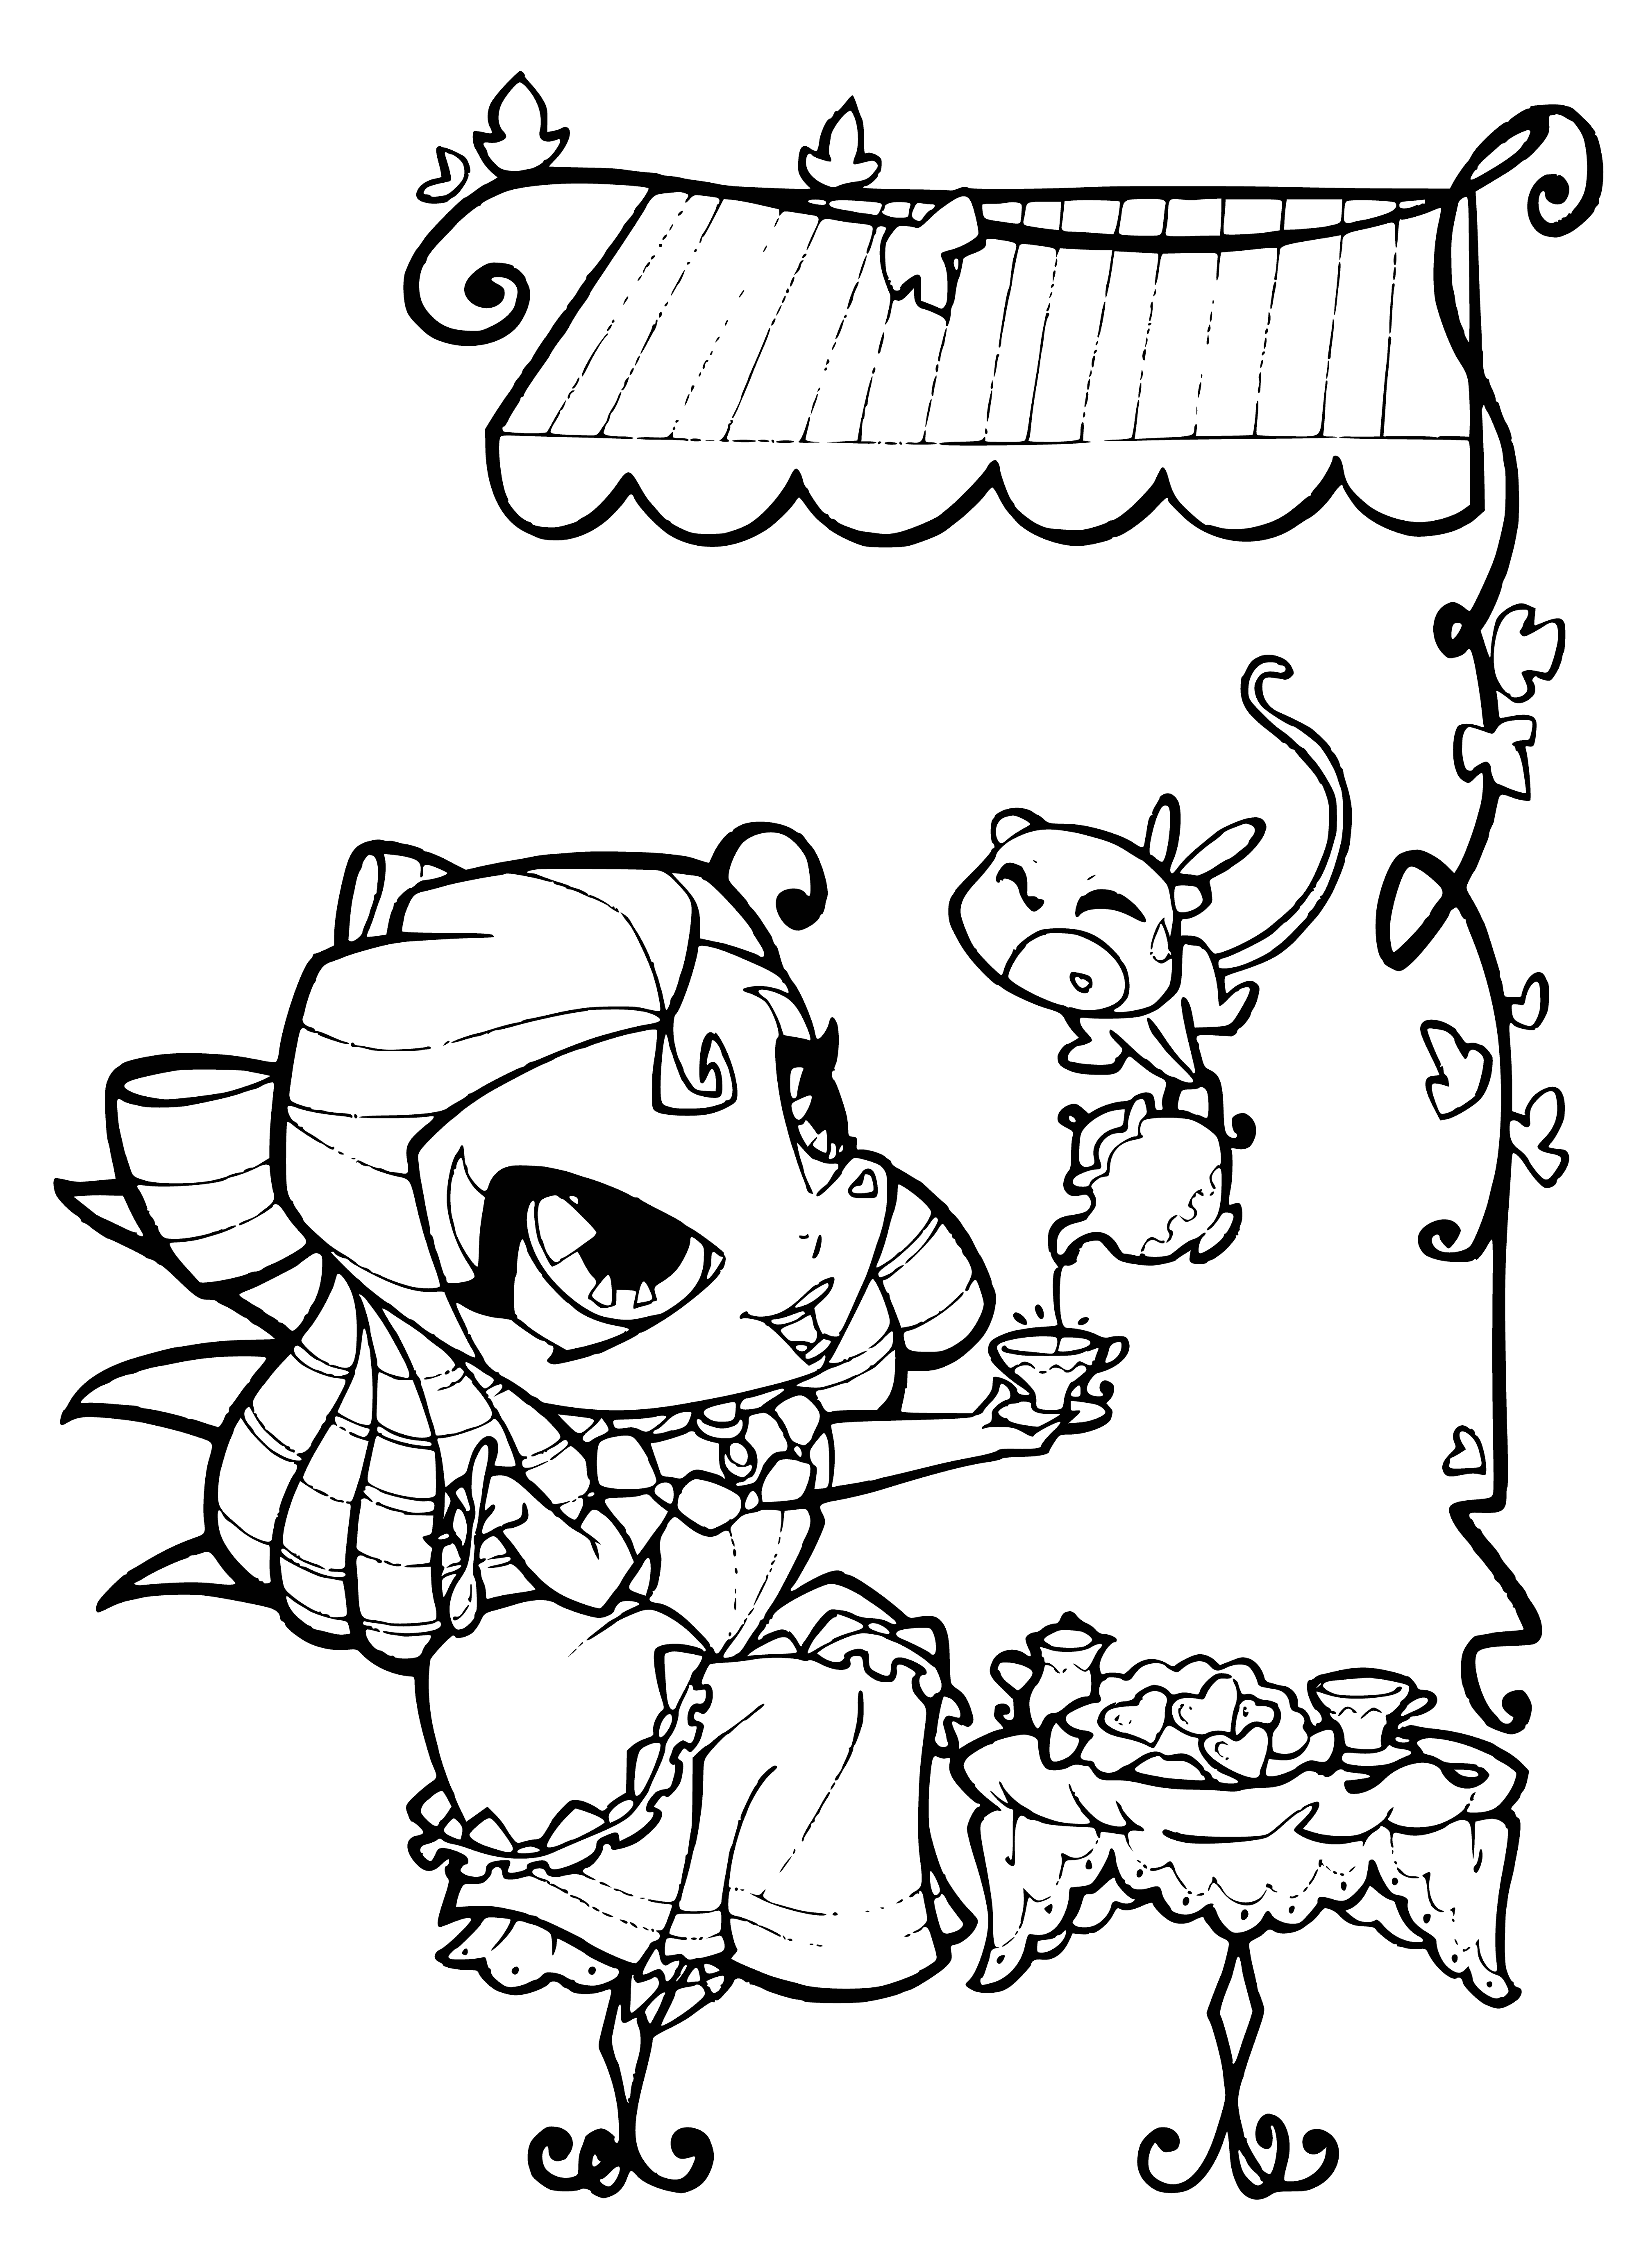 coloring page: The Pixie has good manners, is polite, never interrupts, and is tidy and cleans up after itself. #goodmanners #polite